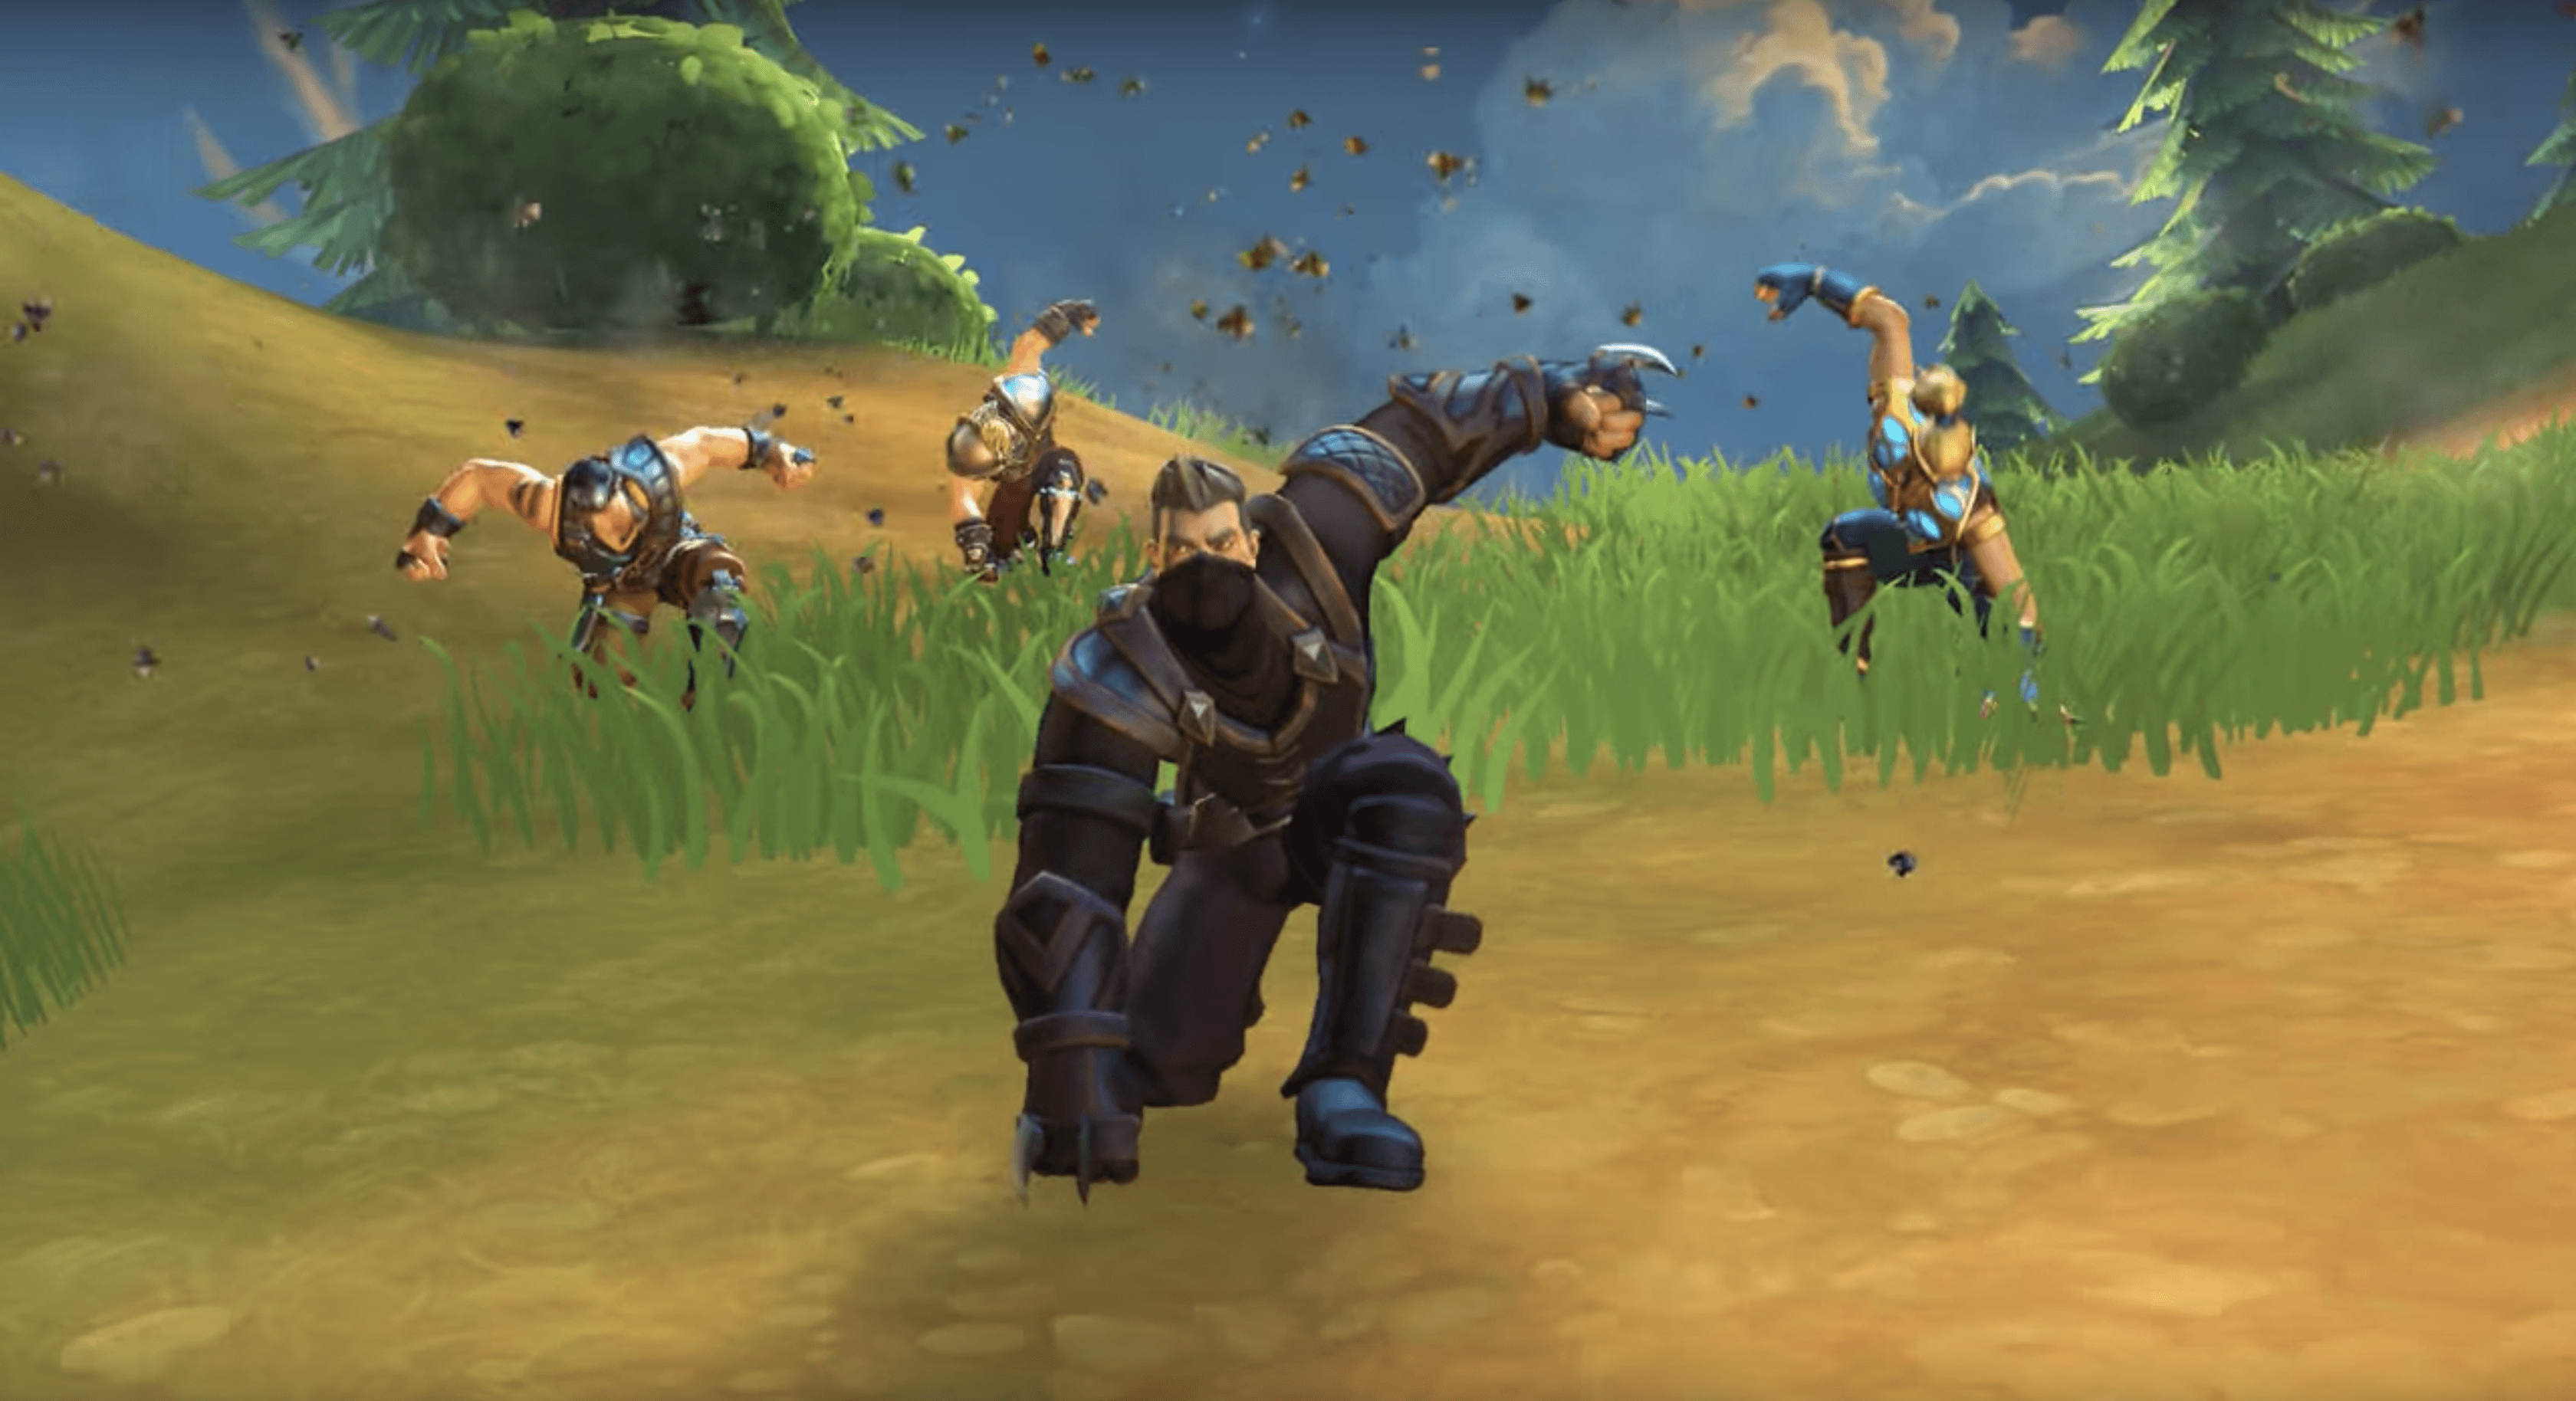 Realm Royale' Tips and Tricks: 5 Things for Beginners to Know